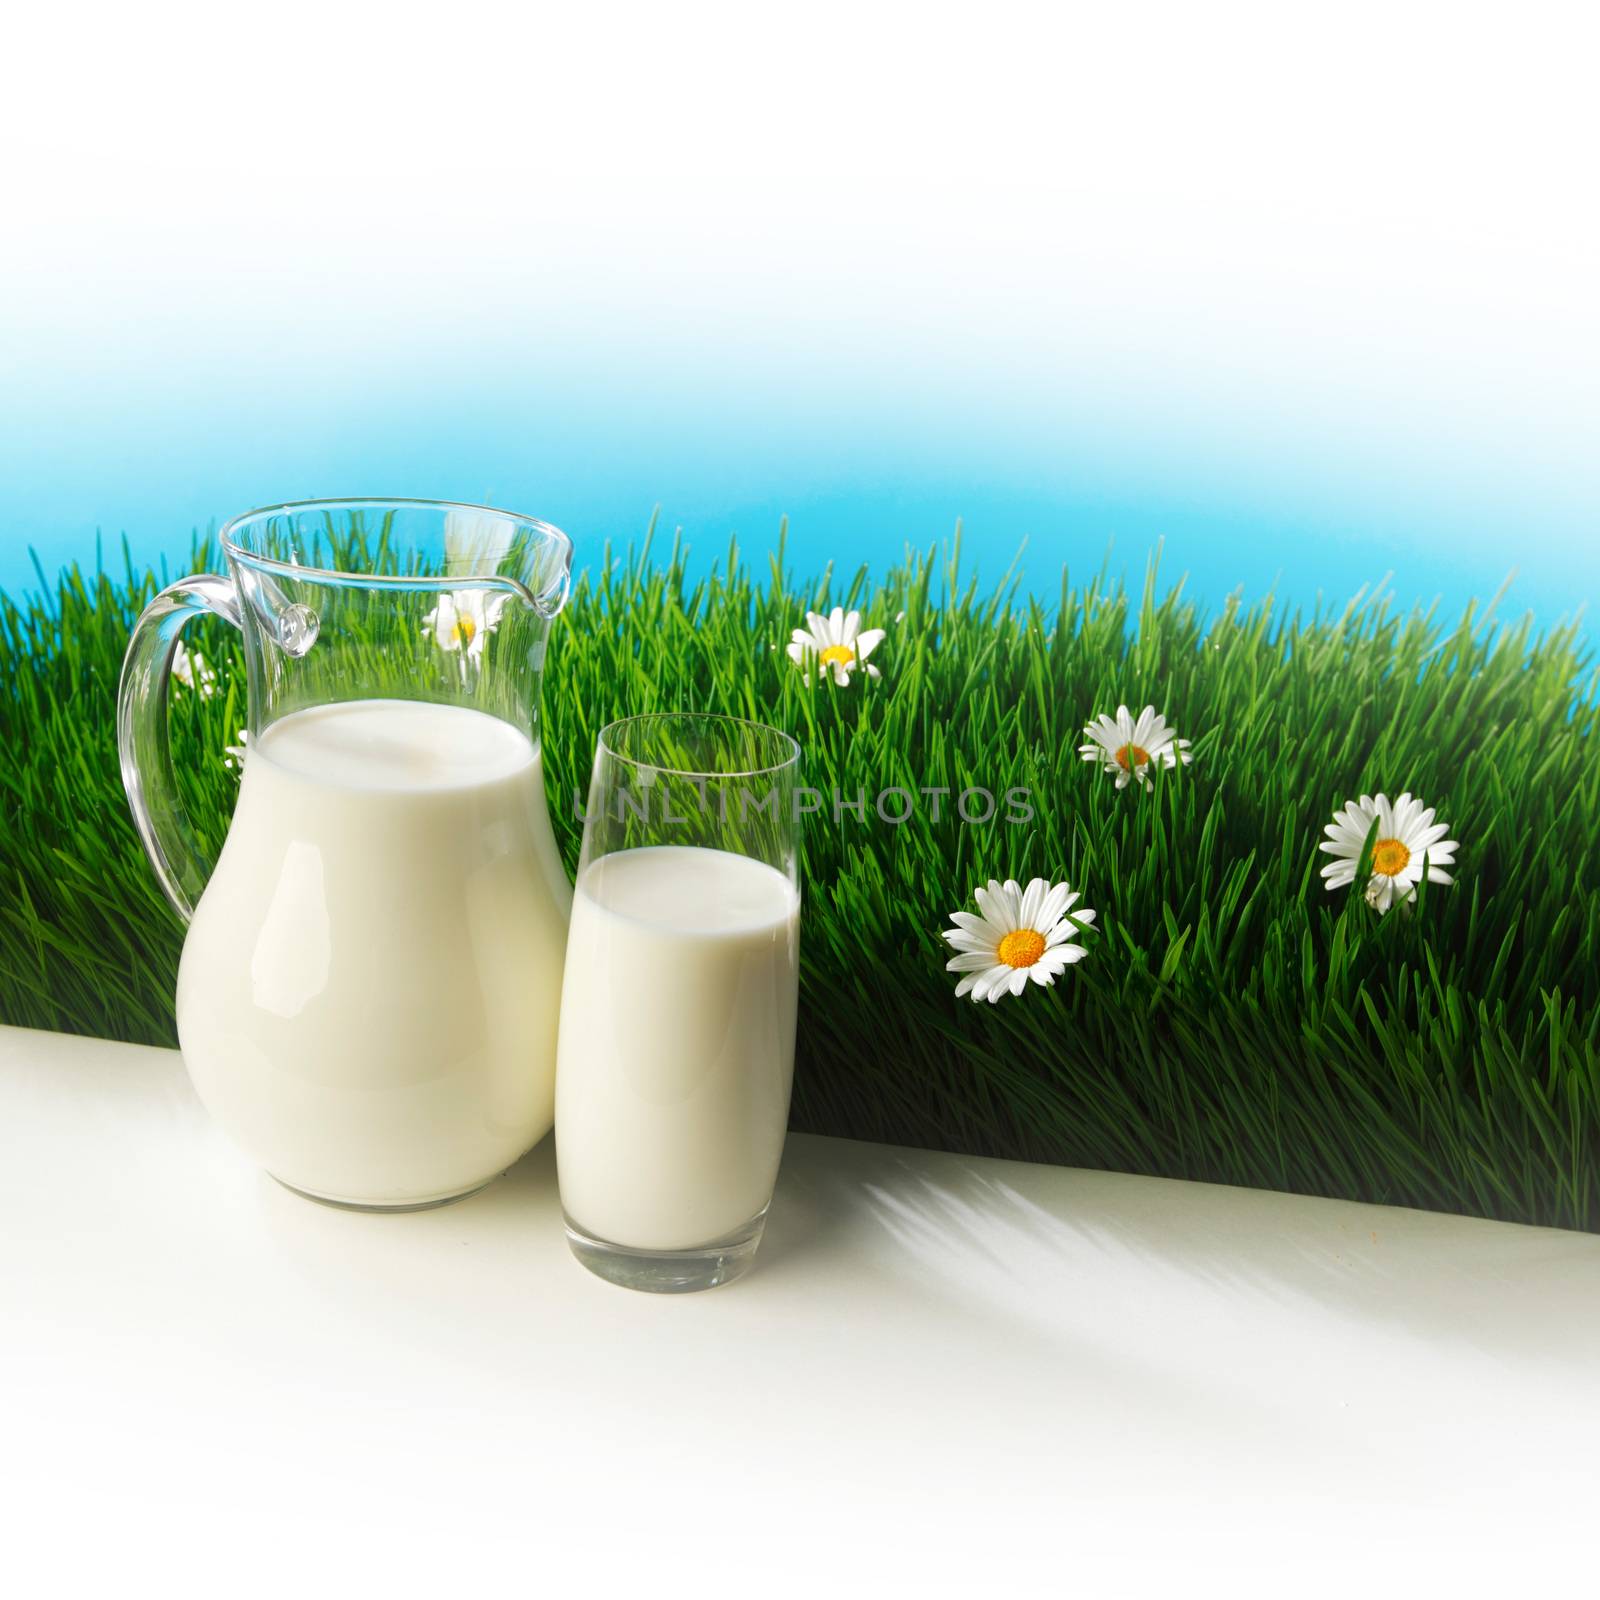 Glass of milk and jar on flower meadow by Yellowj